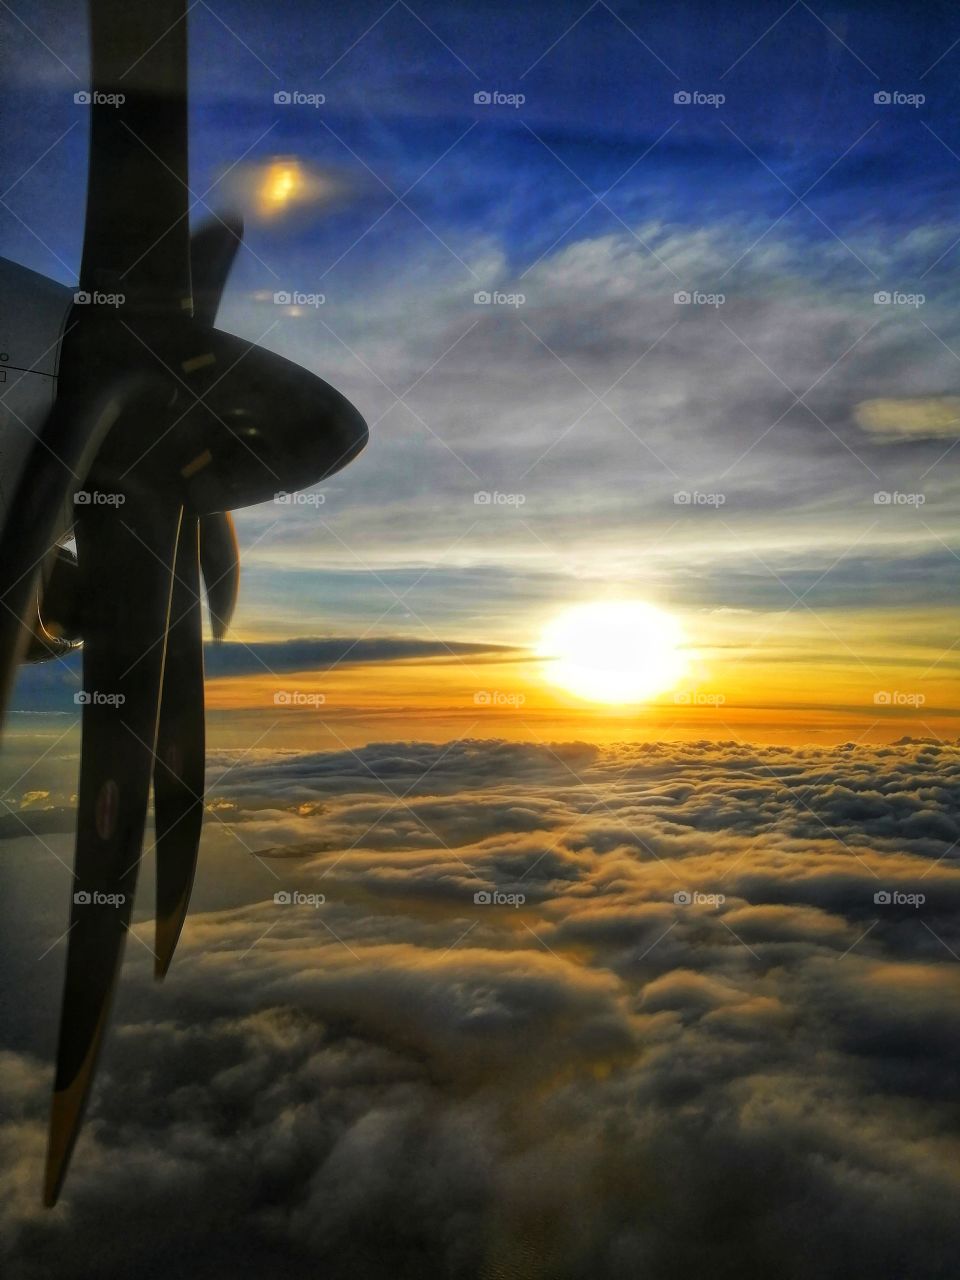 A breathtaking sunset view and sea of clouds while riding on a plane, showing the airplane propeller in action.